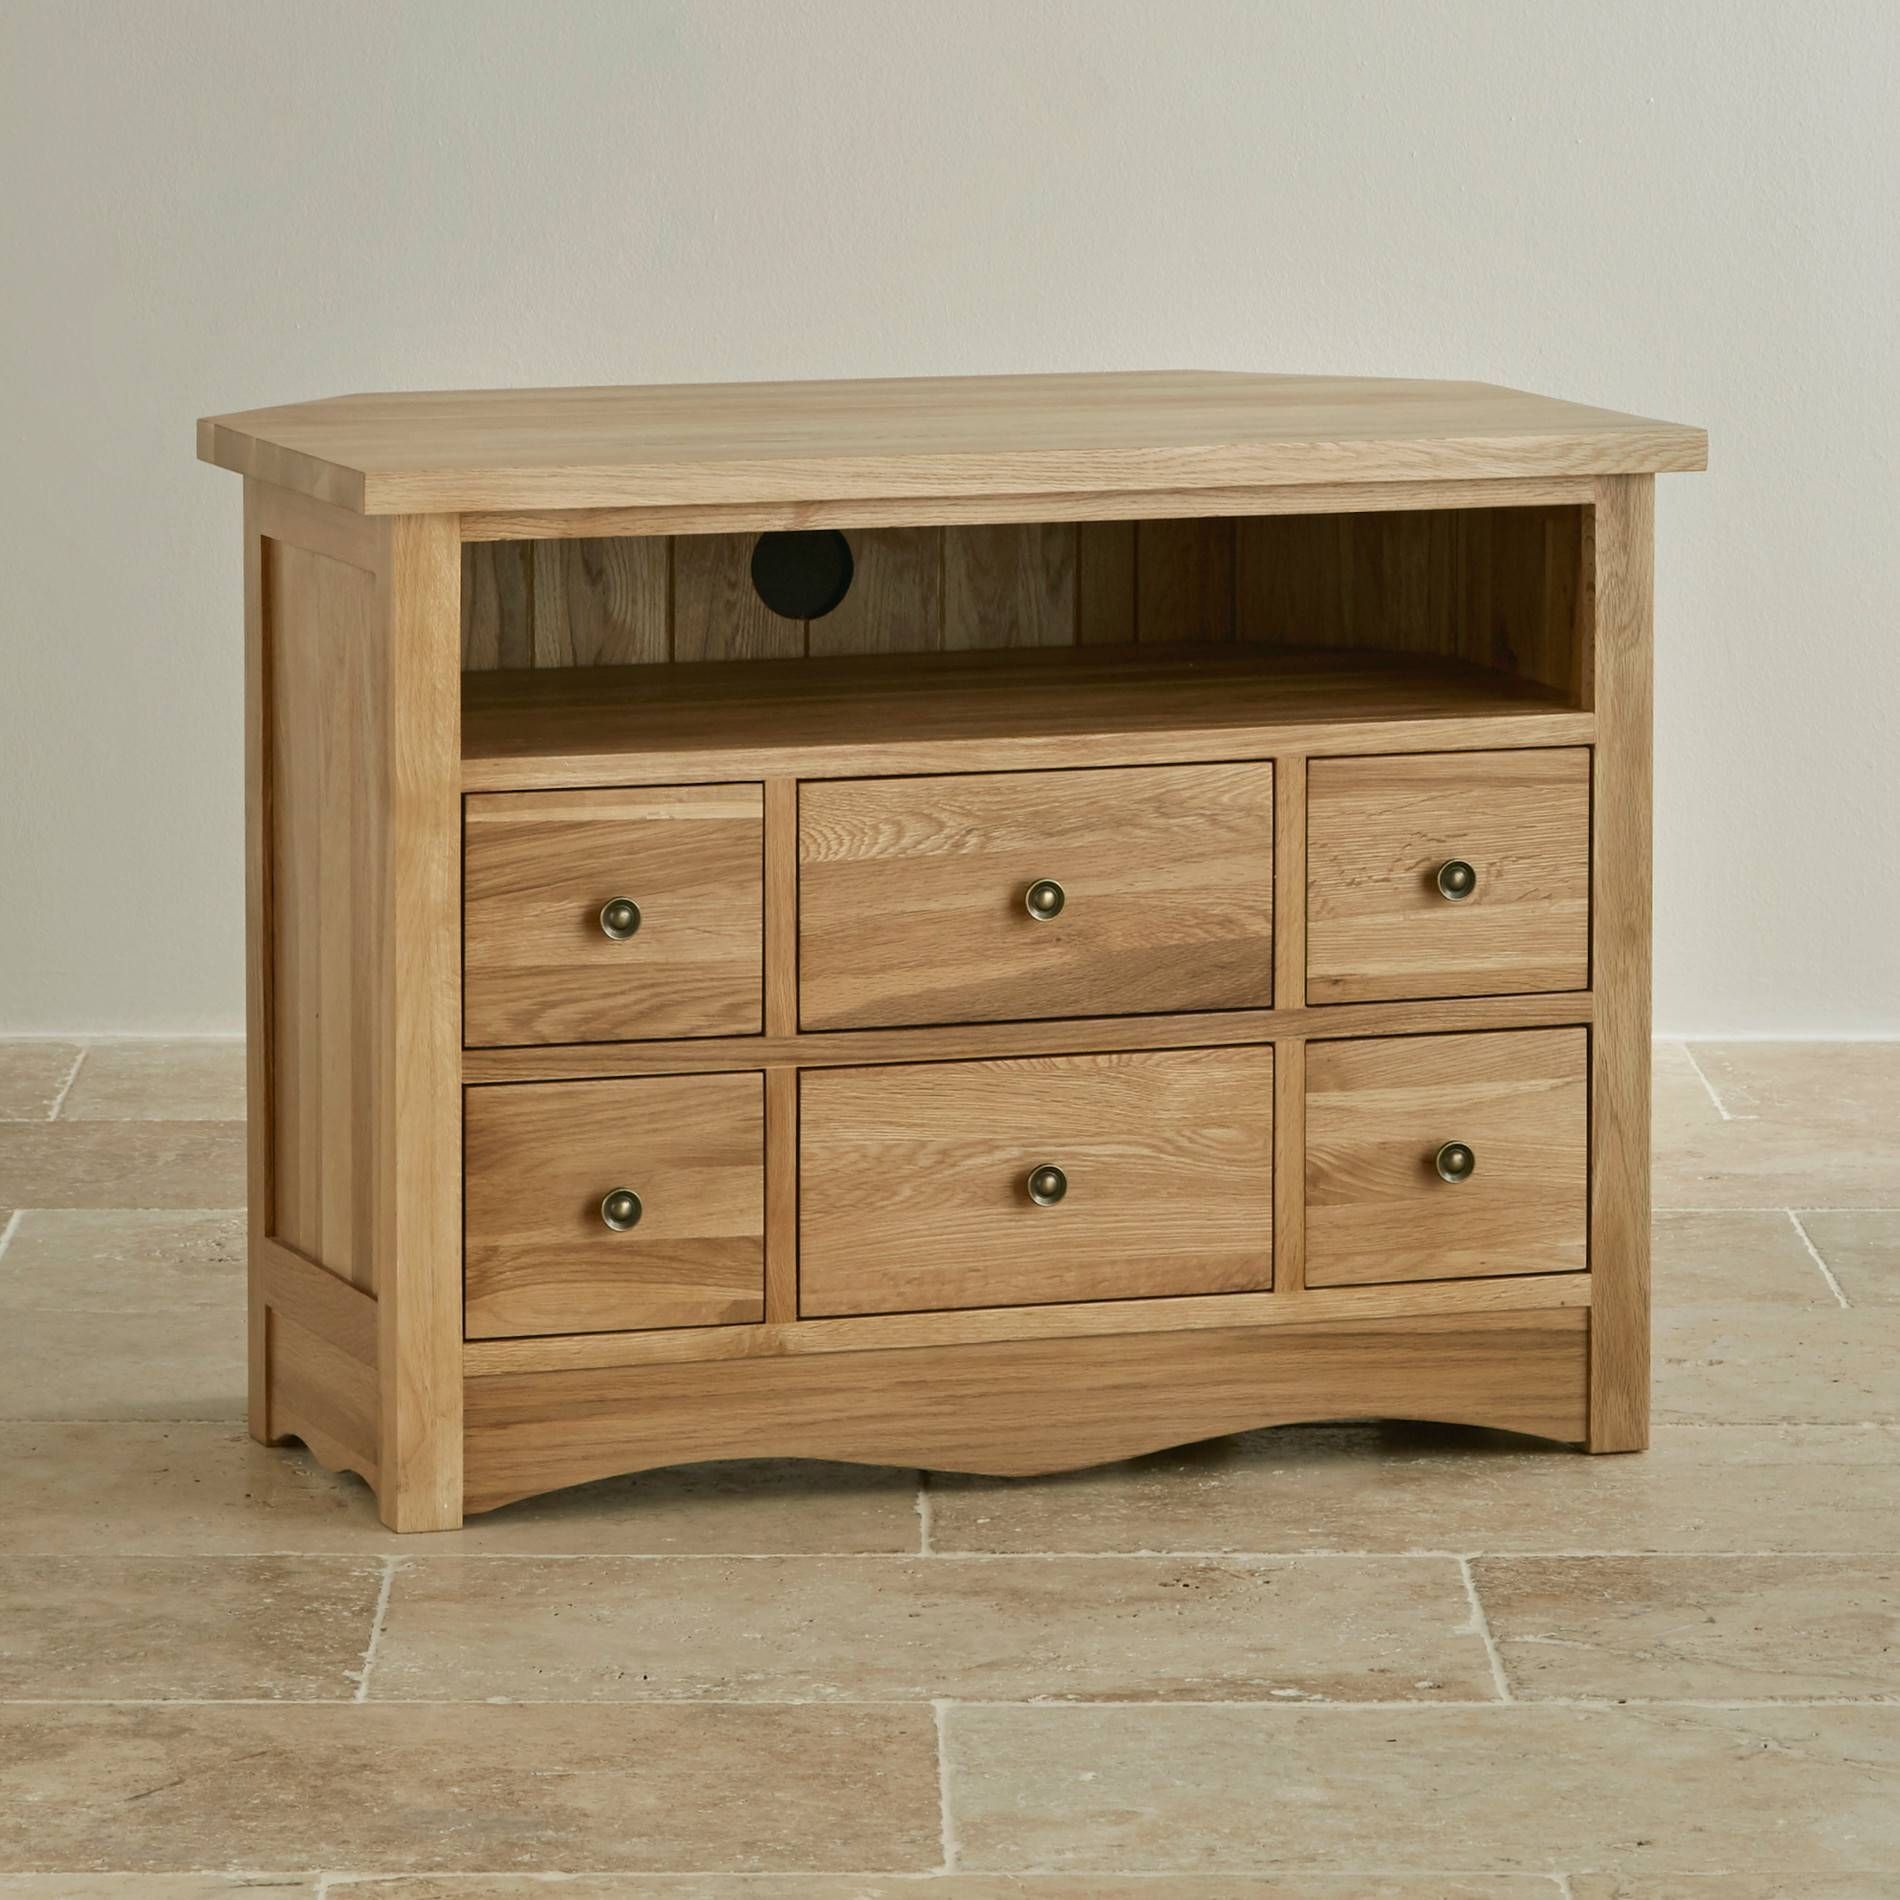 Cairo Corner Tv Cabinet In Natural Solid Oak | Oak Furniture Land In Solid Wood Corner Tv Cabinets (View 9 of 15)